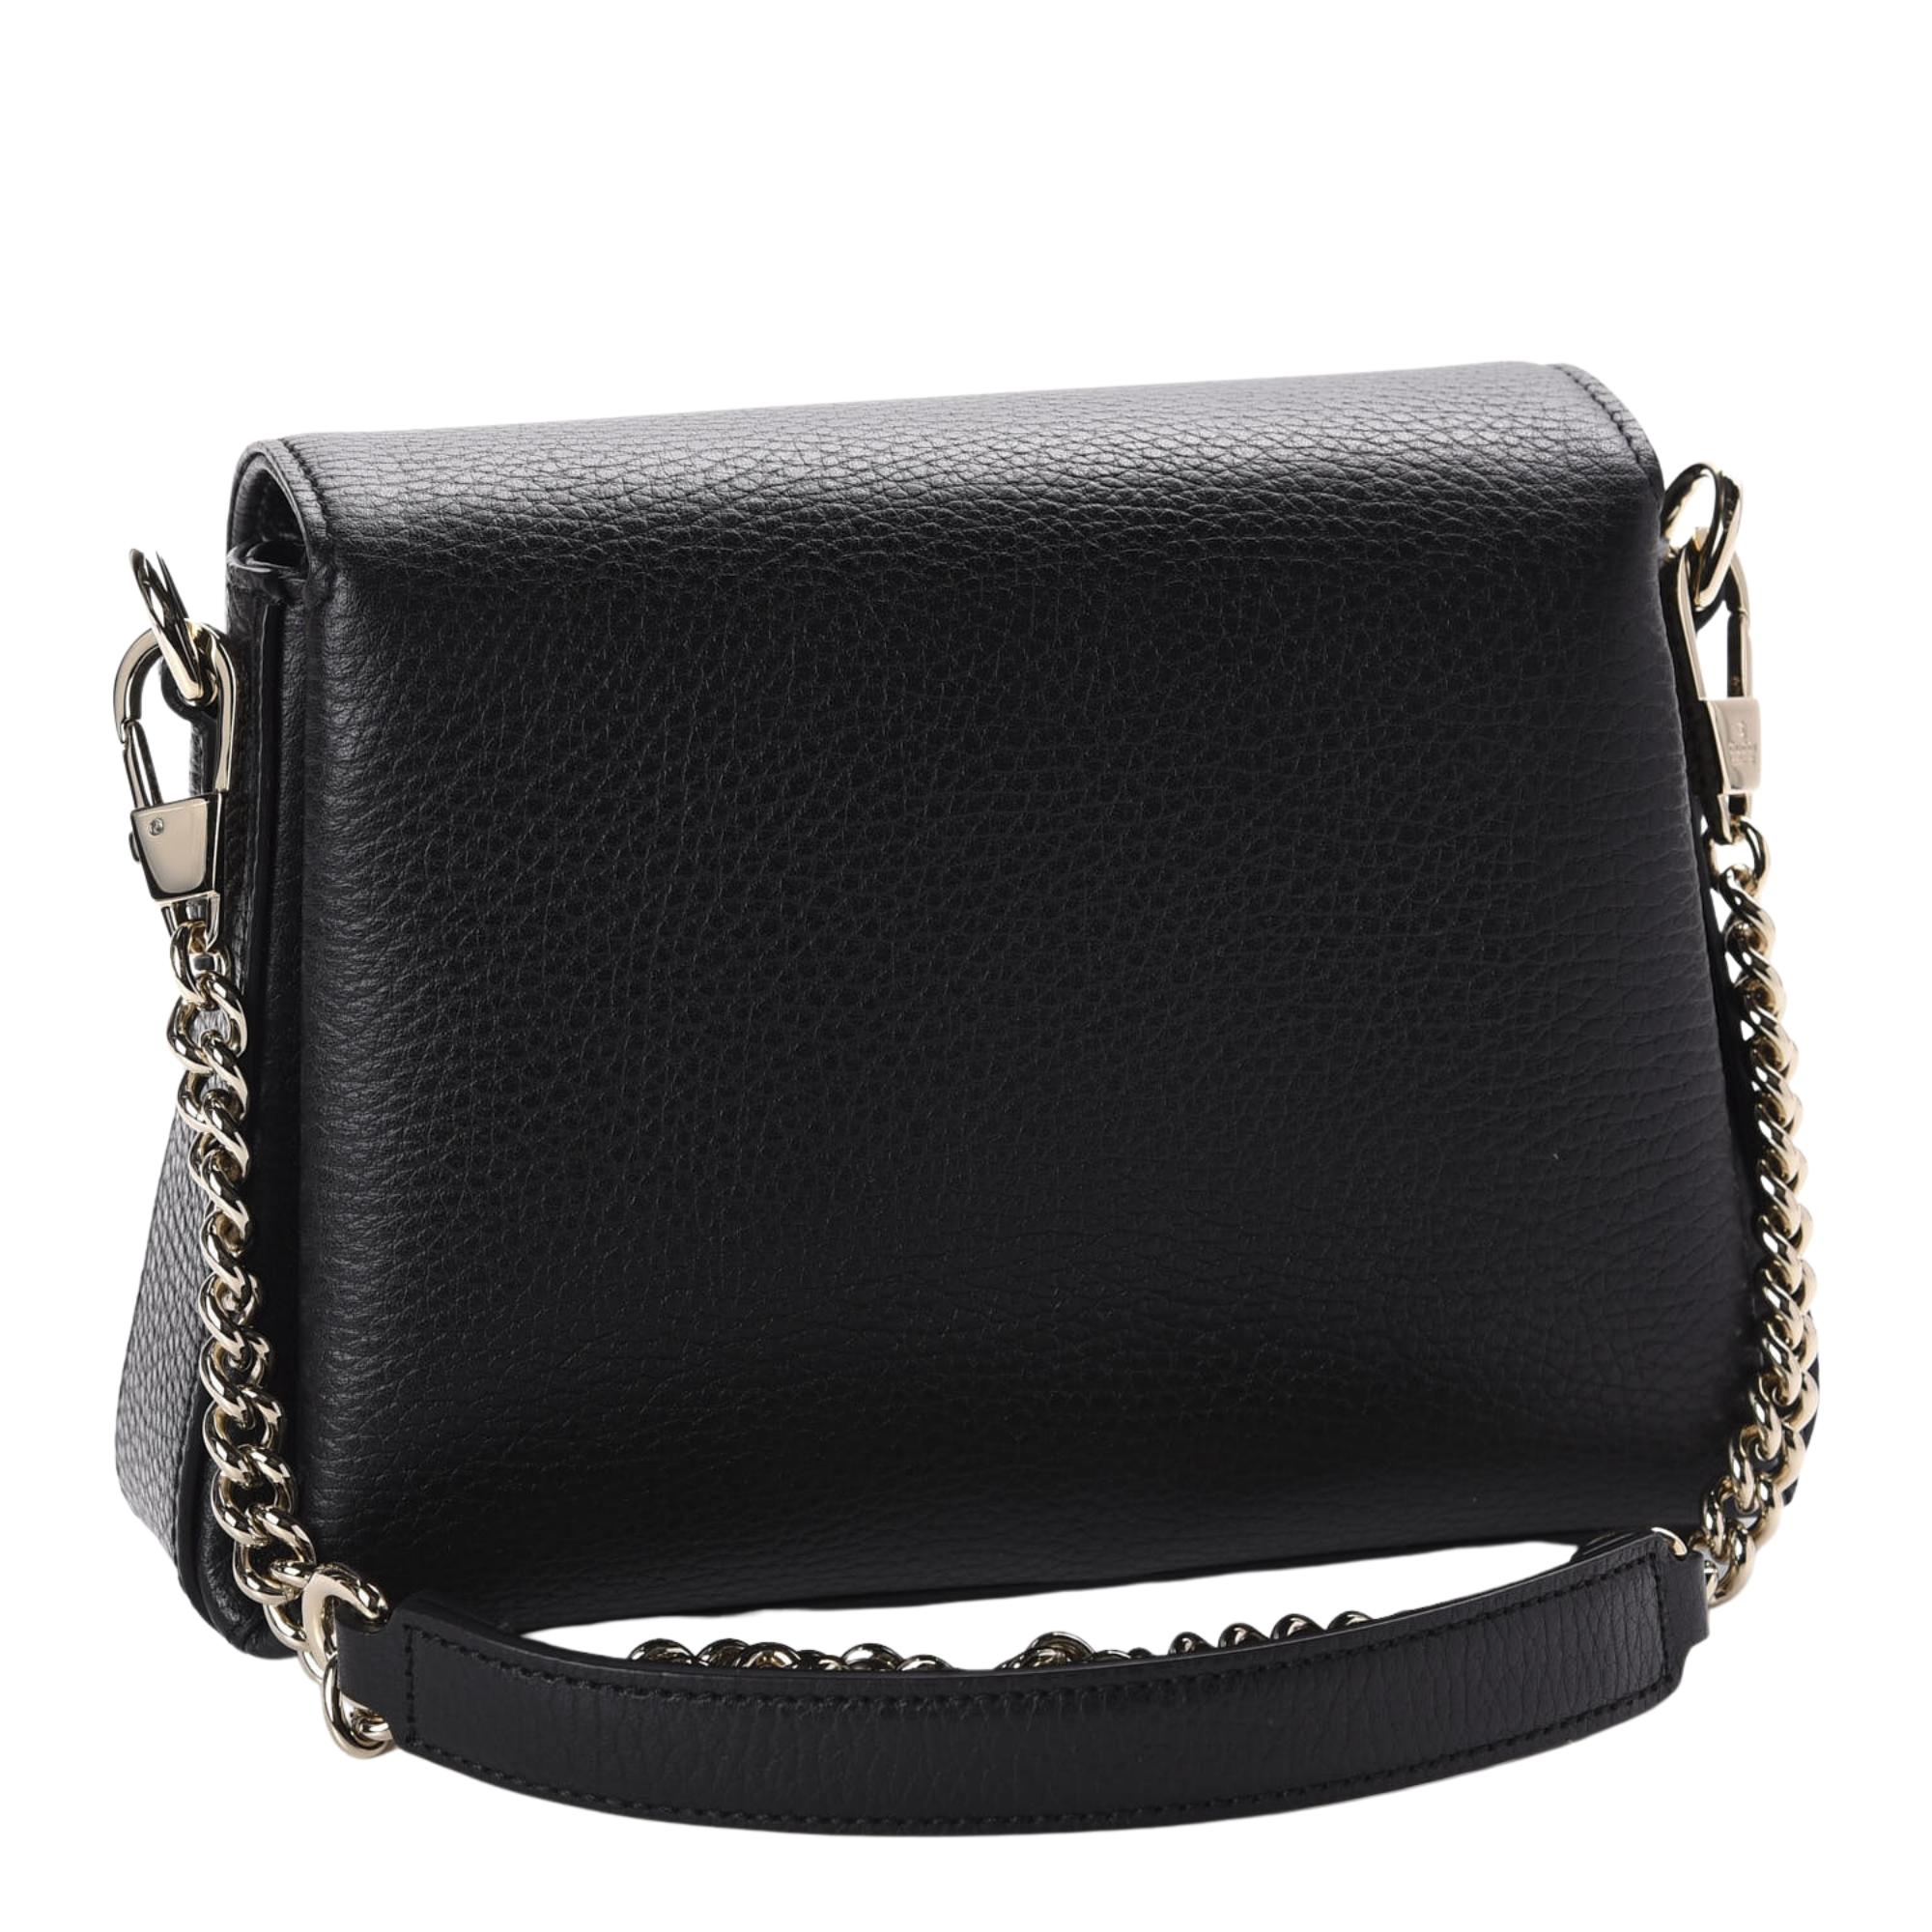 This crossbody bag is made of grained calfskin leather in black. The bag features polished light gold hardware, a chain link shoulder strap with a leather shoulder pad and a top crossover flap with an interlocking GG flip lock closure. The The top